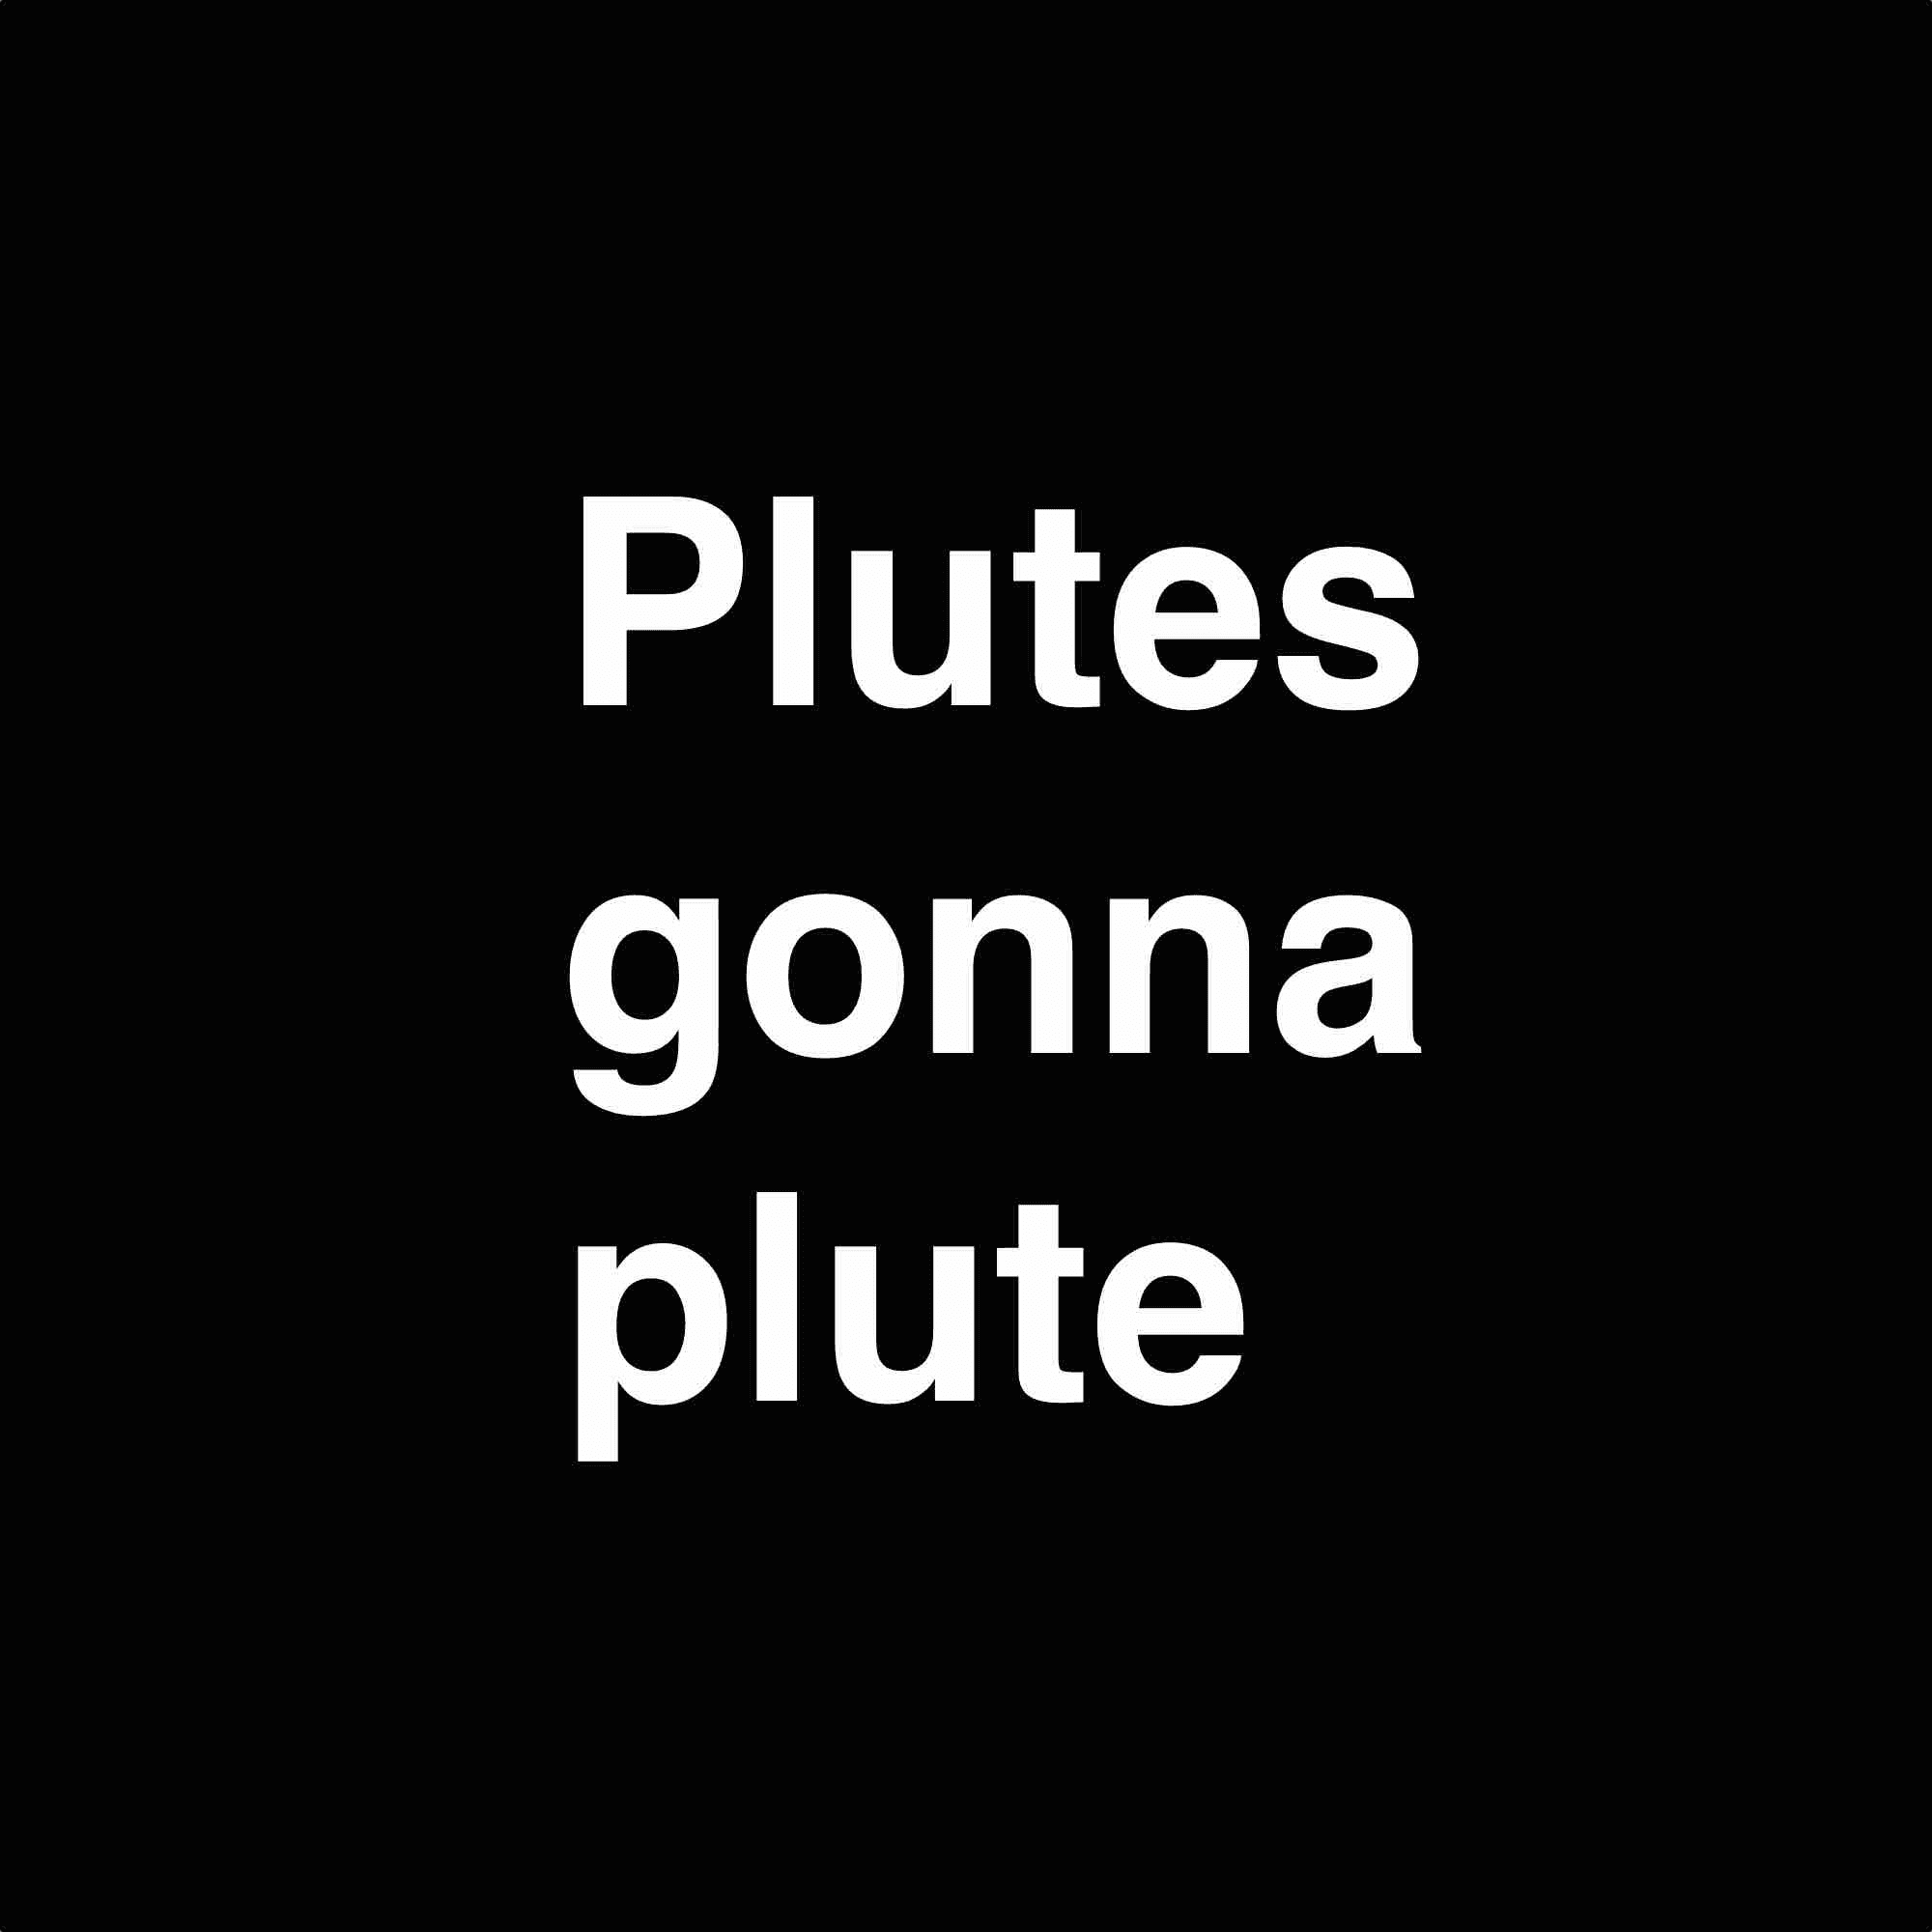 Plutes gonna plute: the template